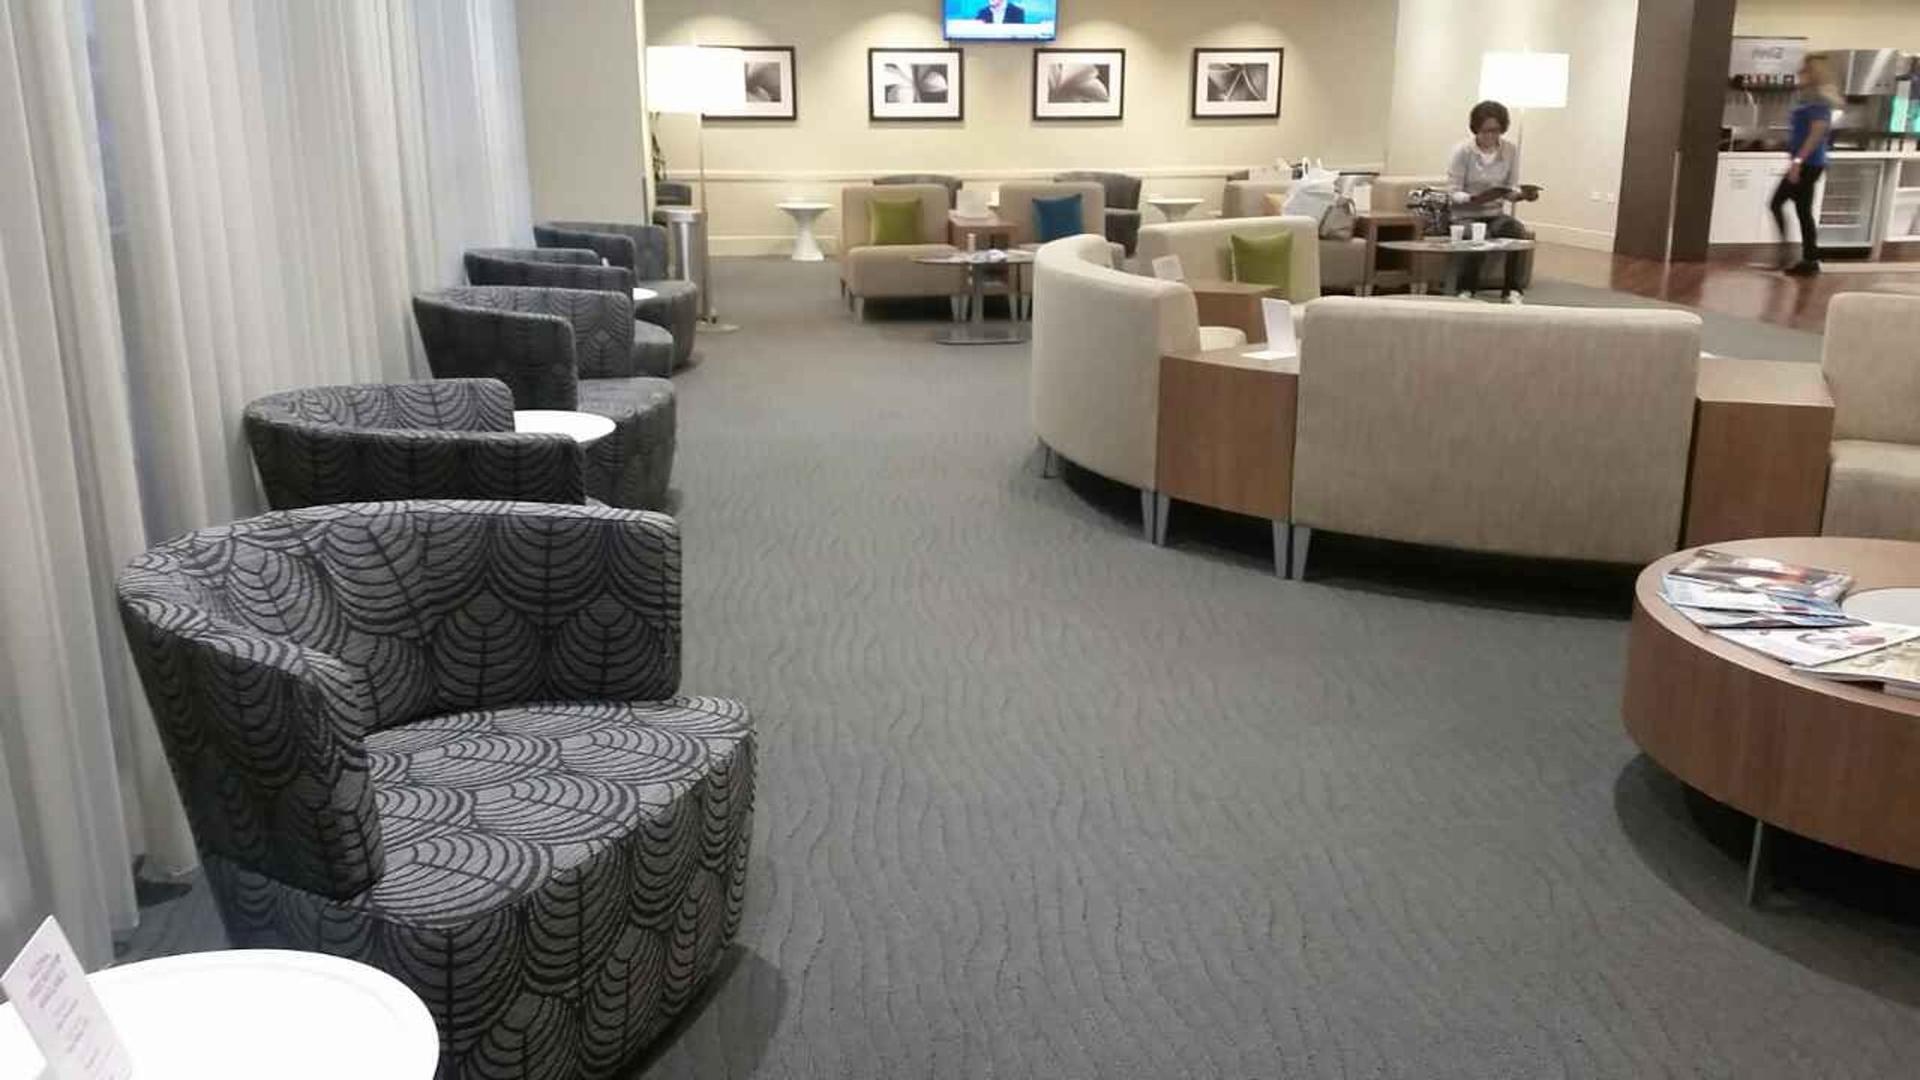 Hawaiian Airlines The Plumeria Lounge image 13 of 41